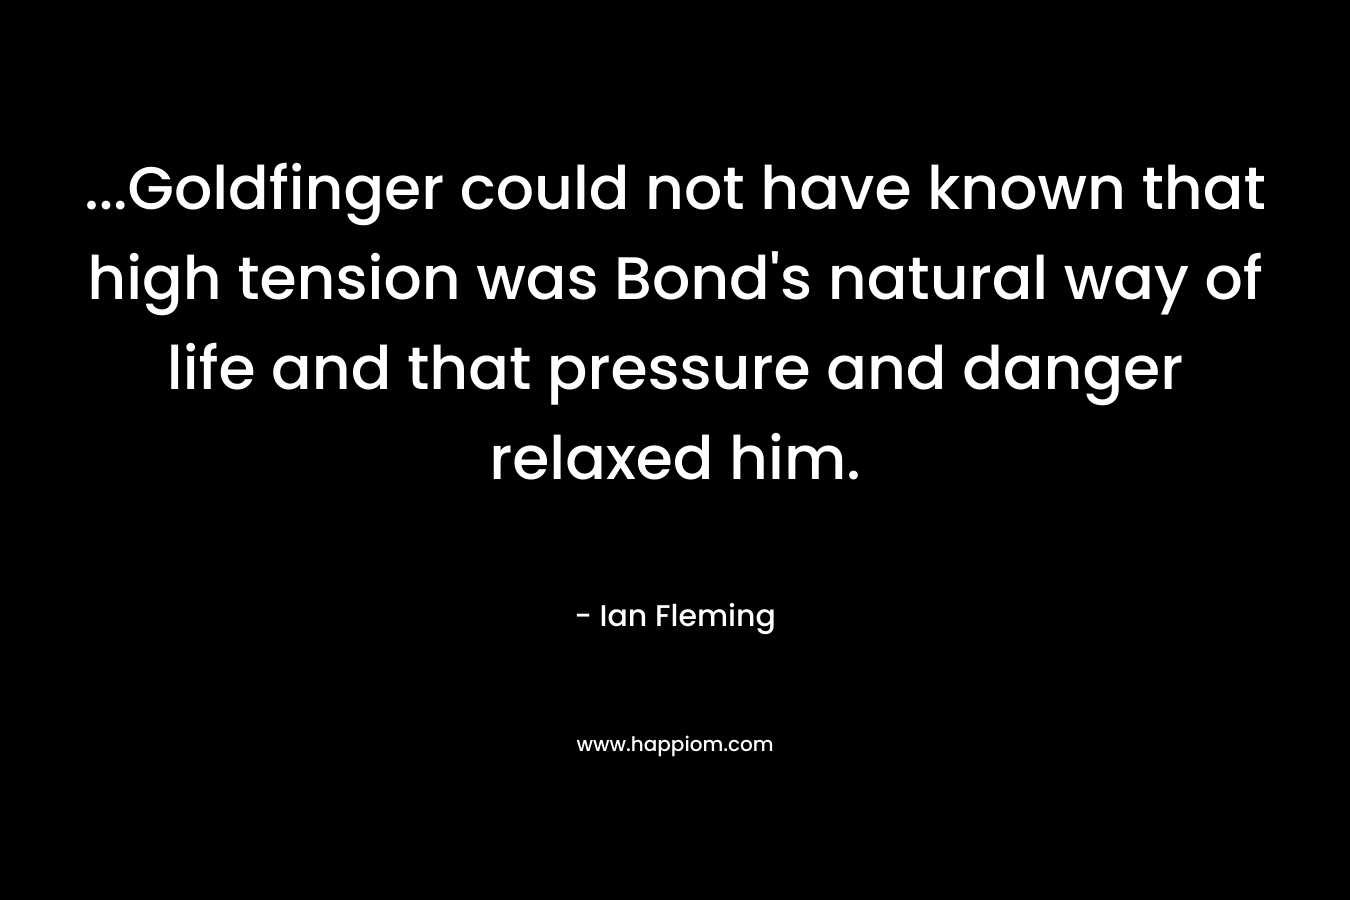 …Goldfinger could not have known that high tension was Bond’s natural way of life and that pressure and danger relaxed him. – Ian Fleming